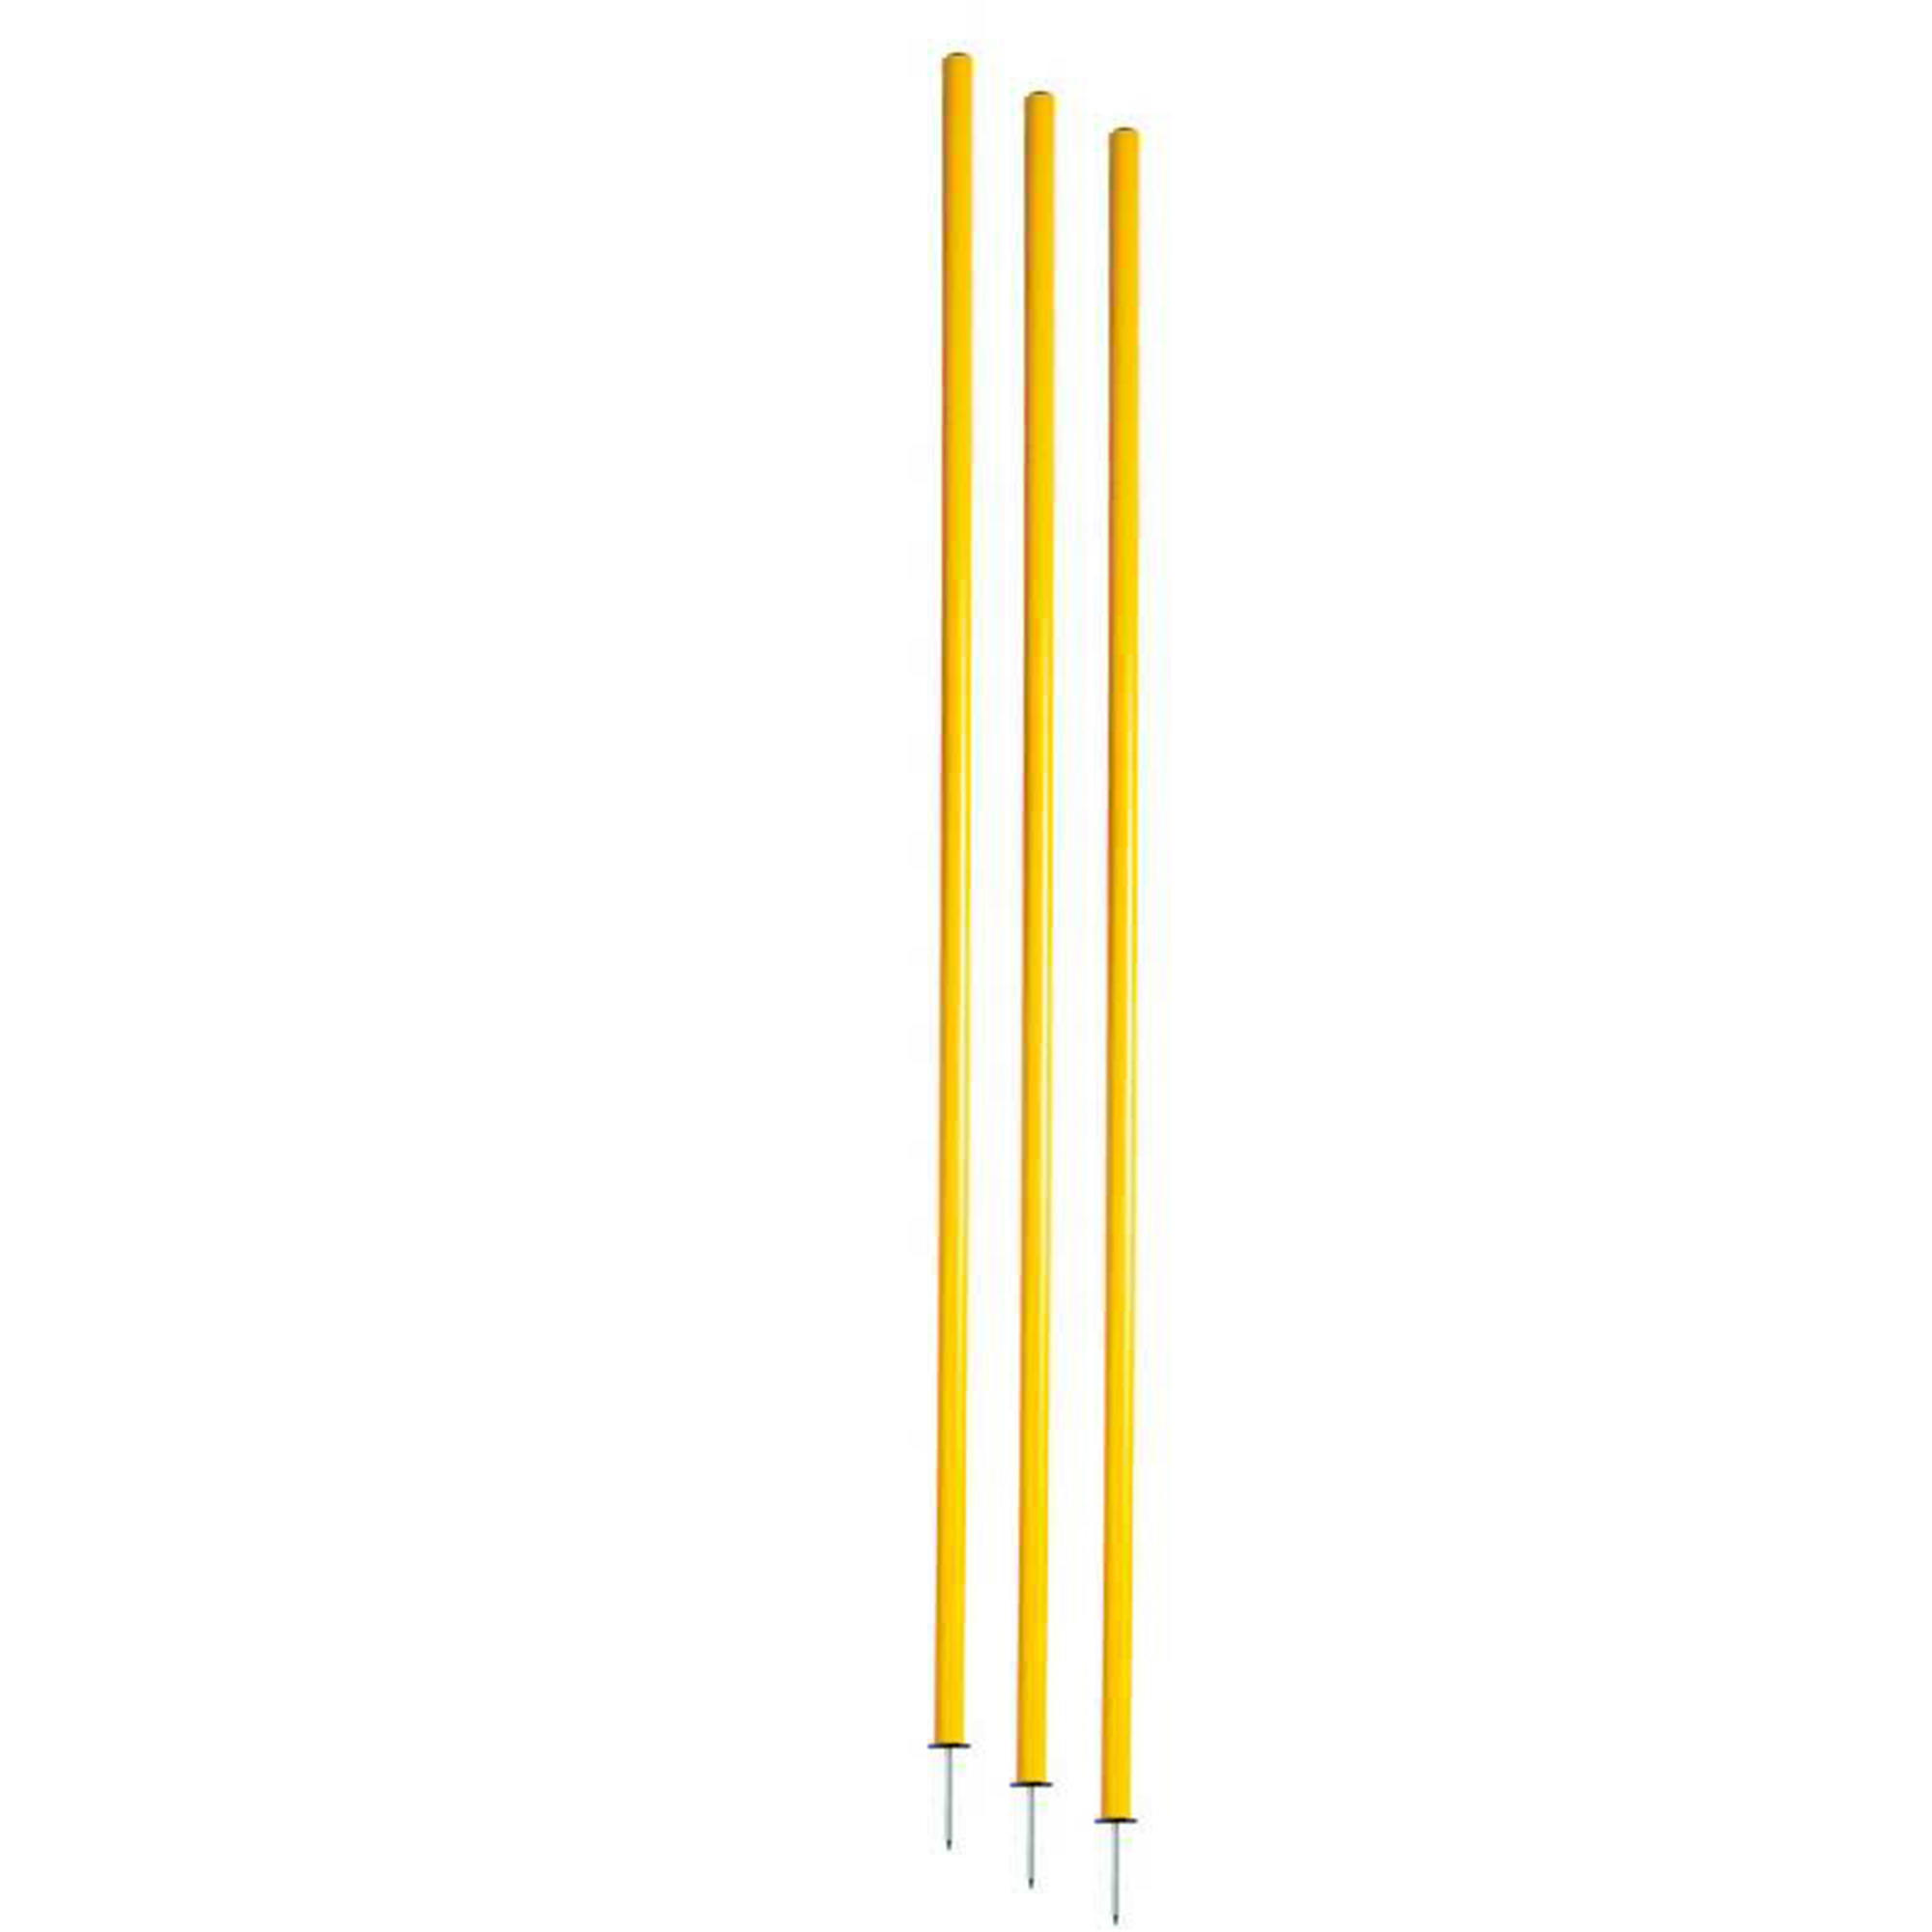 TREMBLAY Slalom Training Pack of 3 Poles - Yellow Red